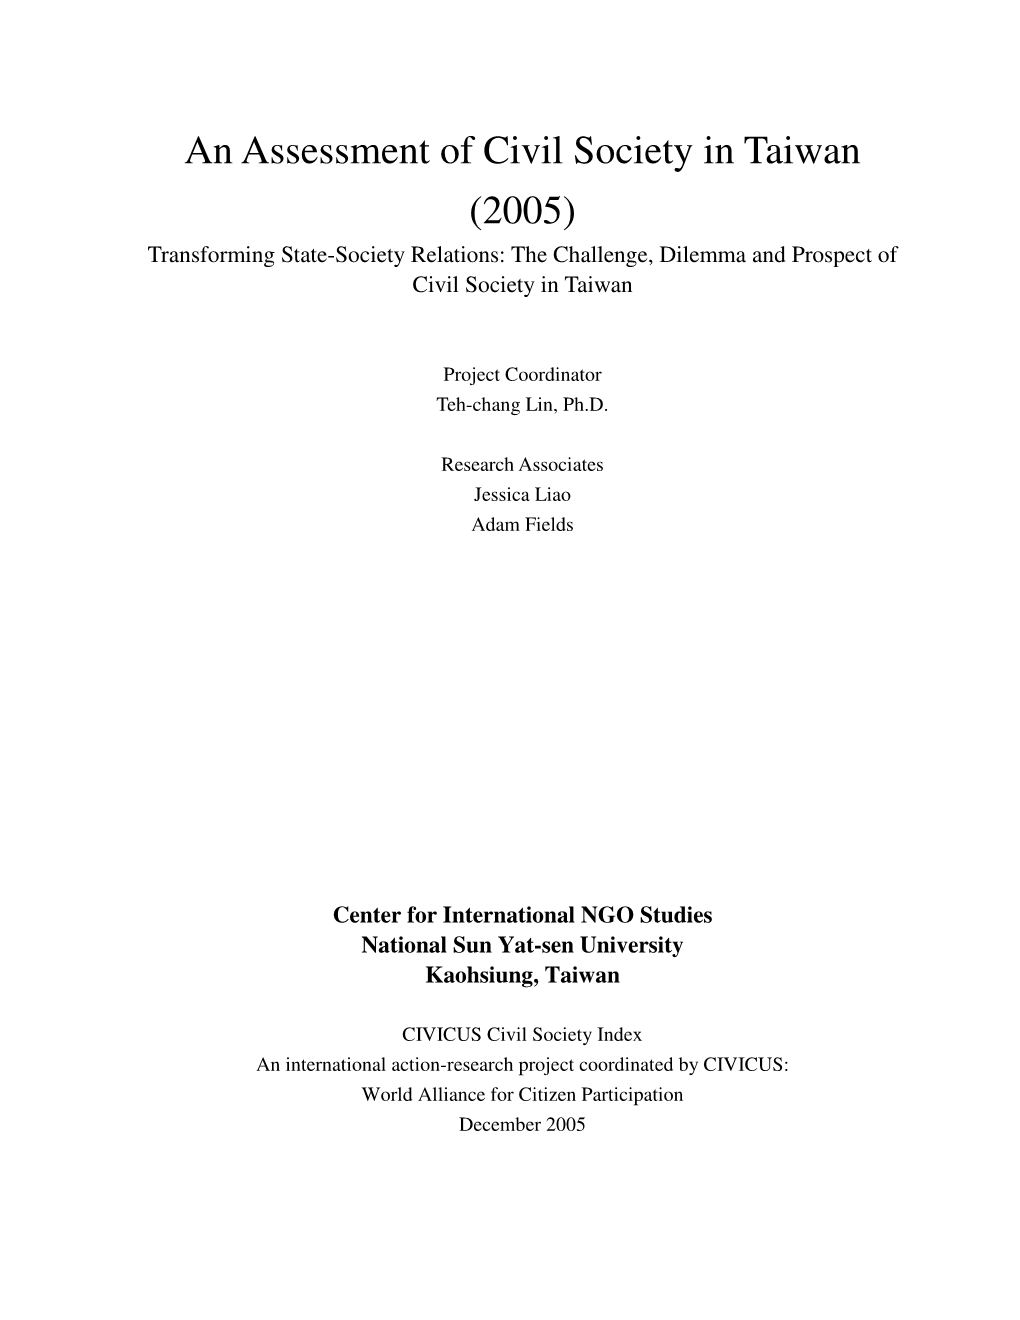 An Assessment of Civil Society in Taiwan (2005) Transforming State-Society Relations: the Challenge, Dilemma and Prospect of Civil Society in Taiwan